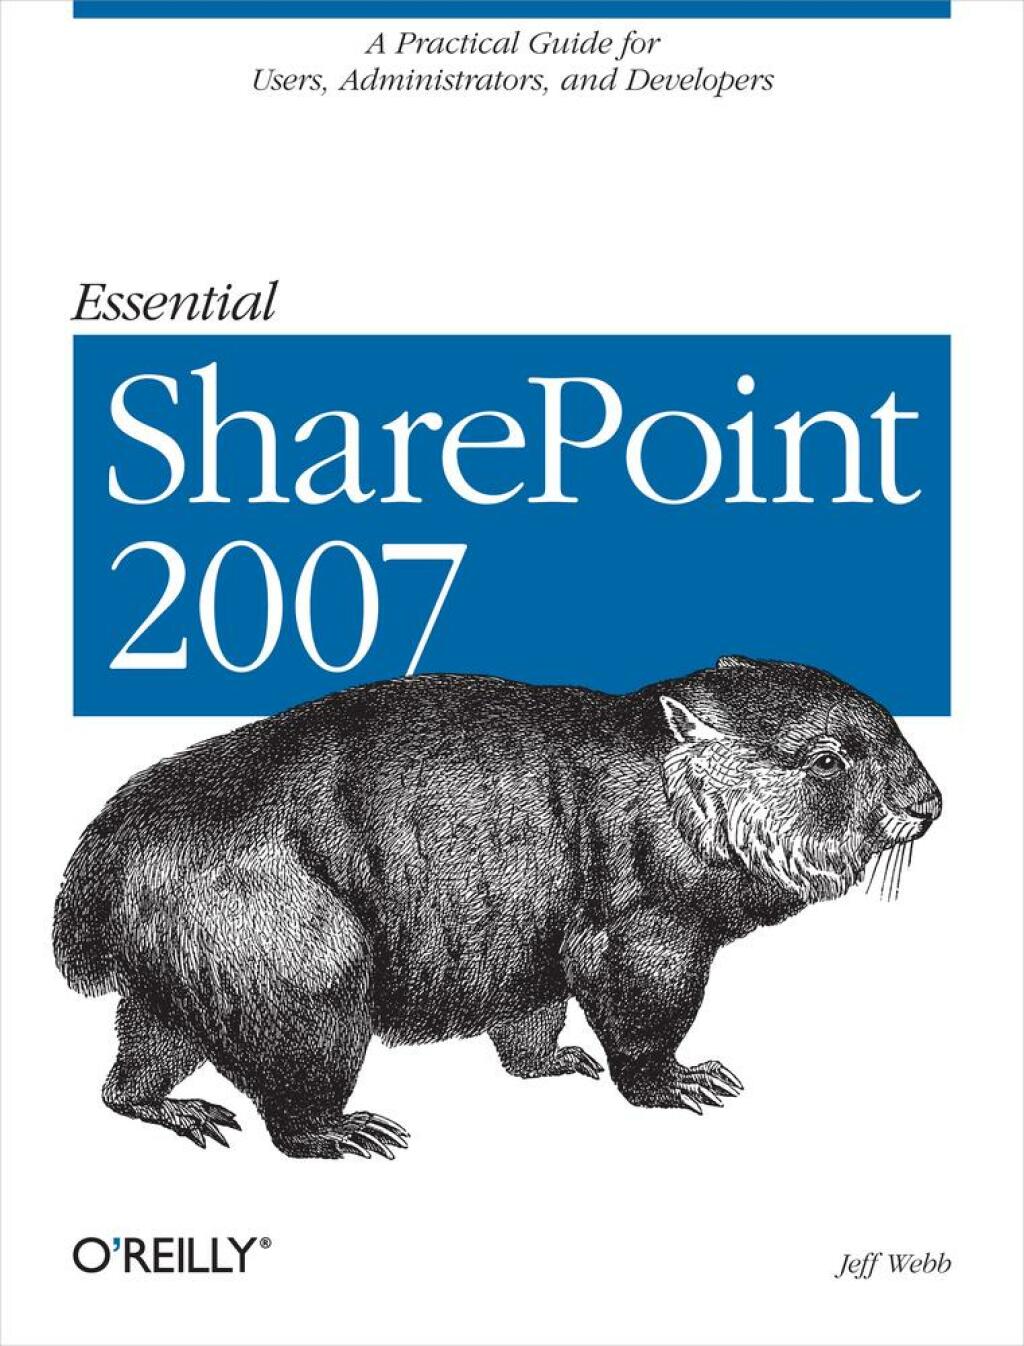 Essential SharePoint 2007: A Practical Guide for Users, Administrators and Developers Jeff Webb Author